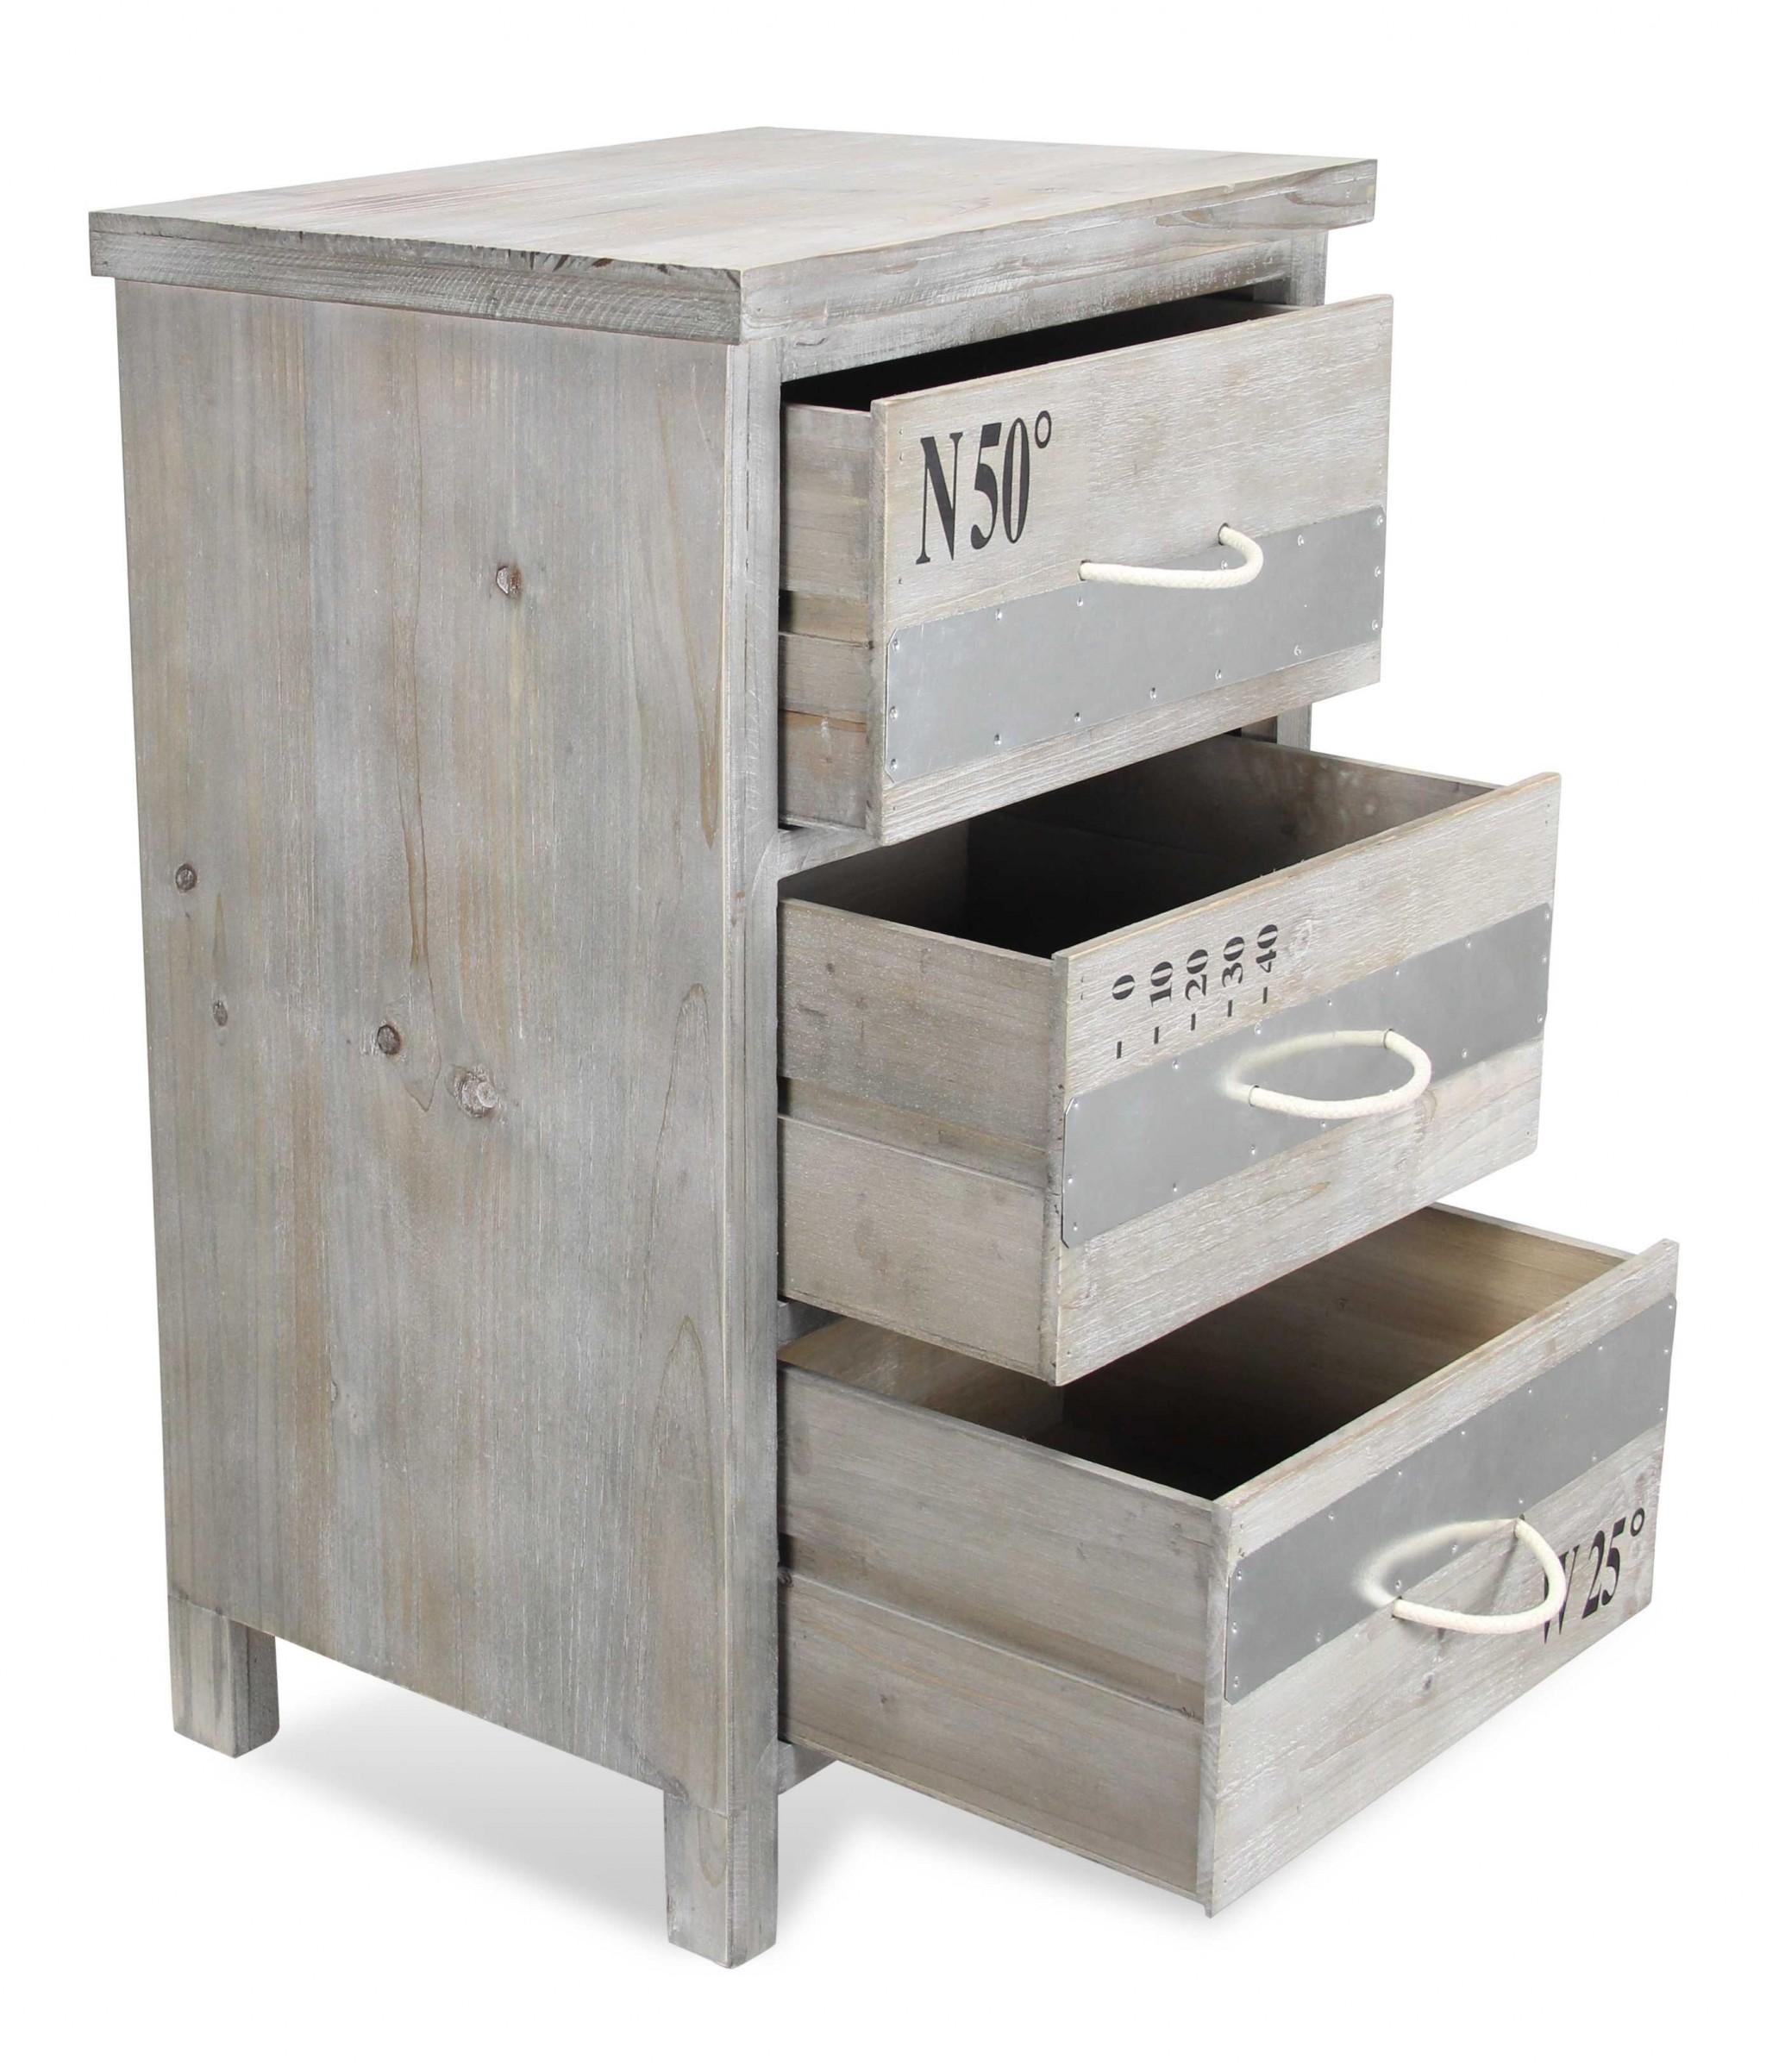 Nautical Gray Wash Wood Accent Cabinet